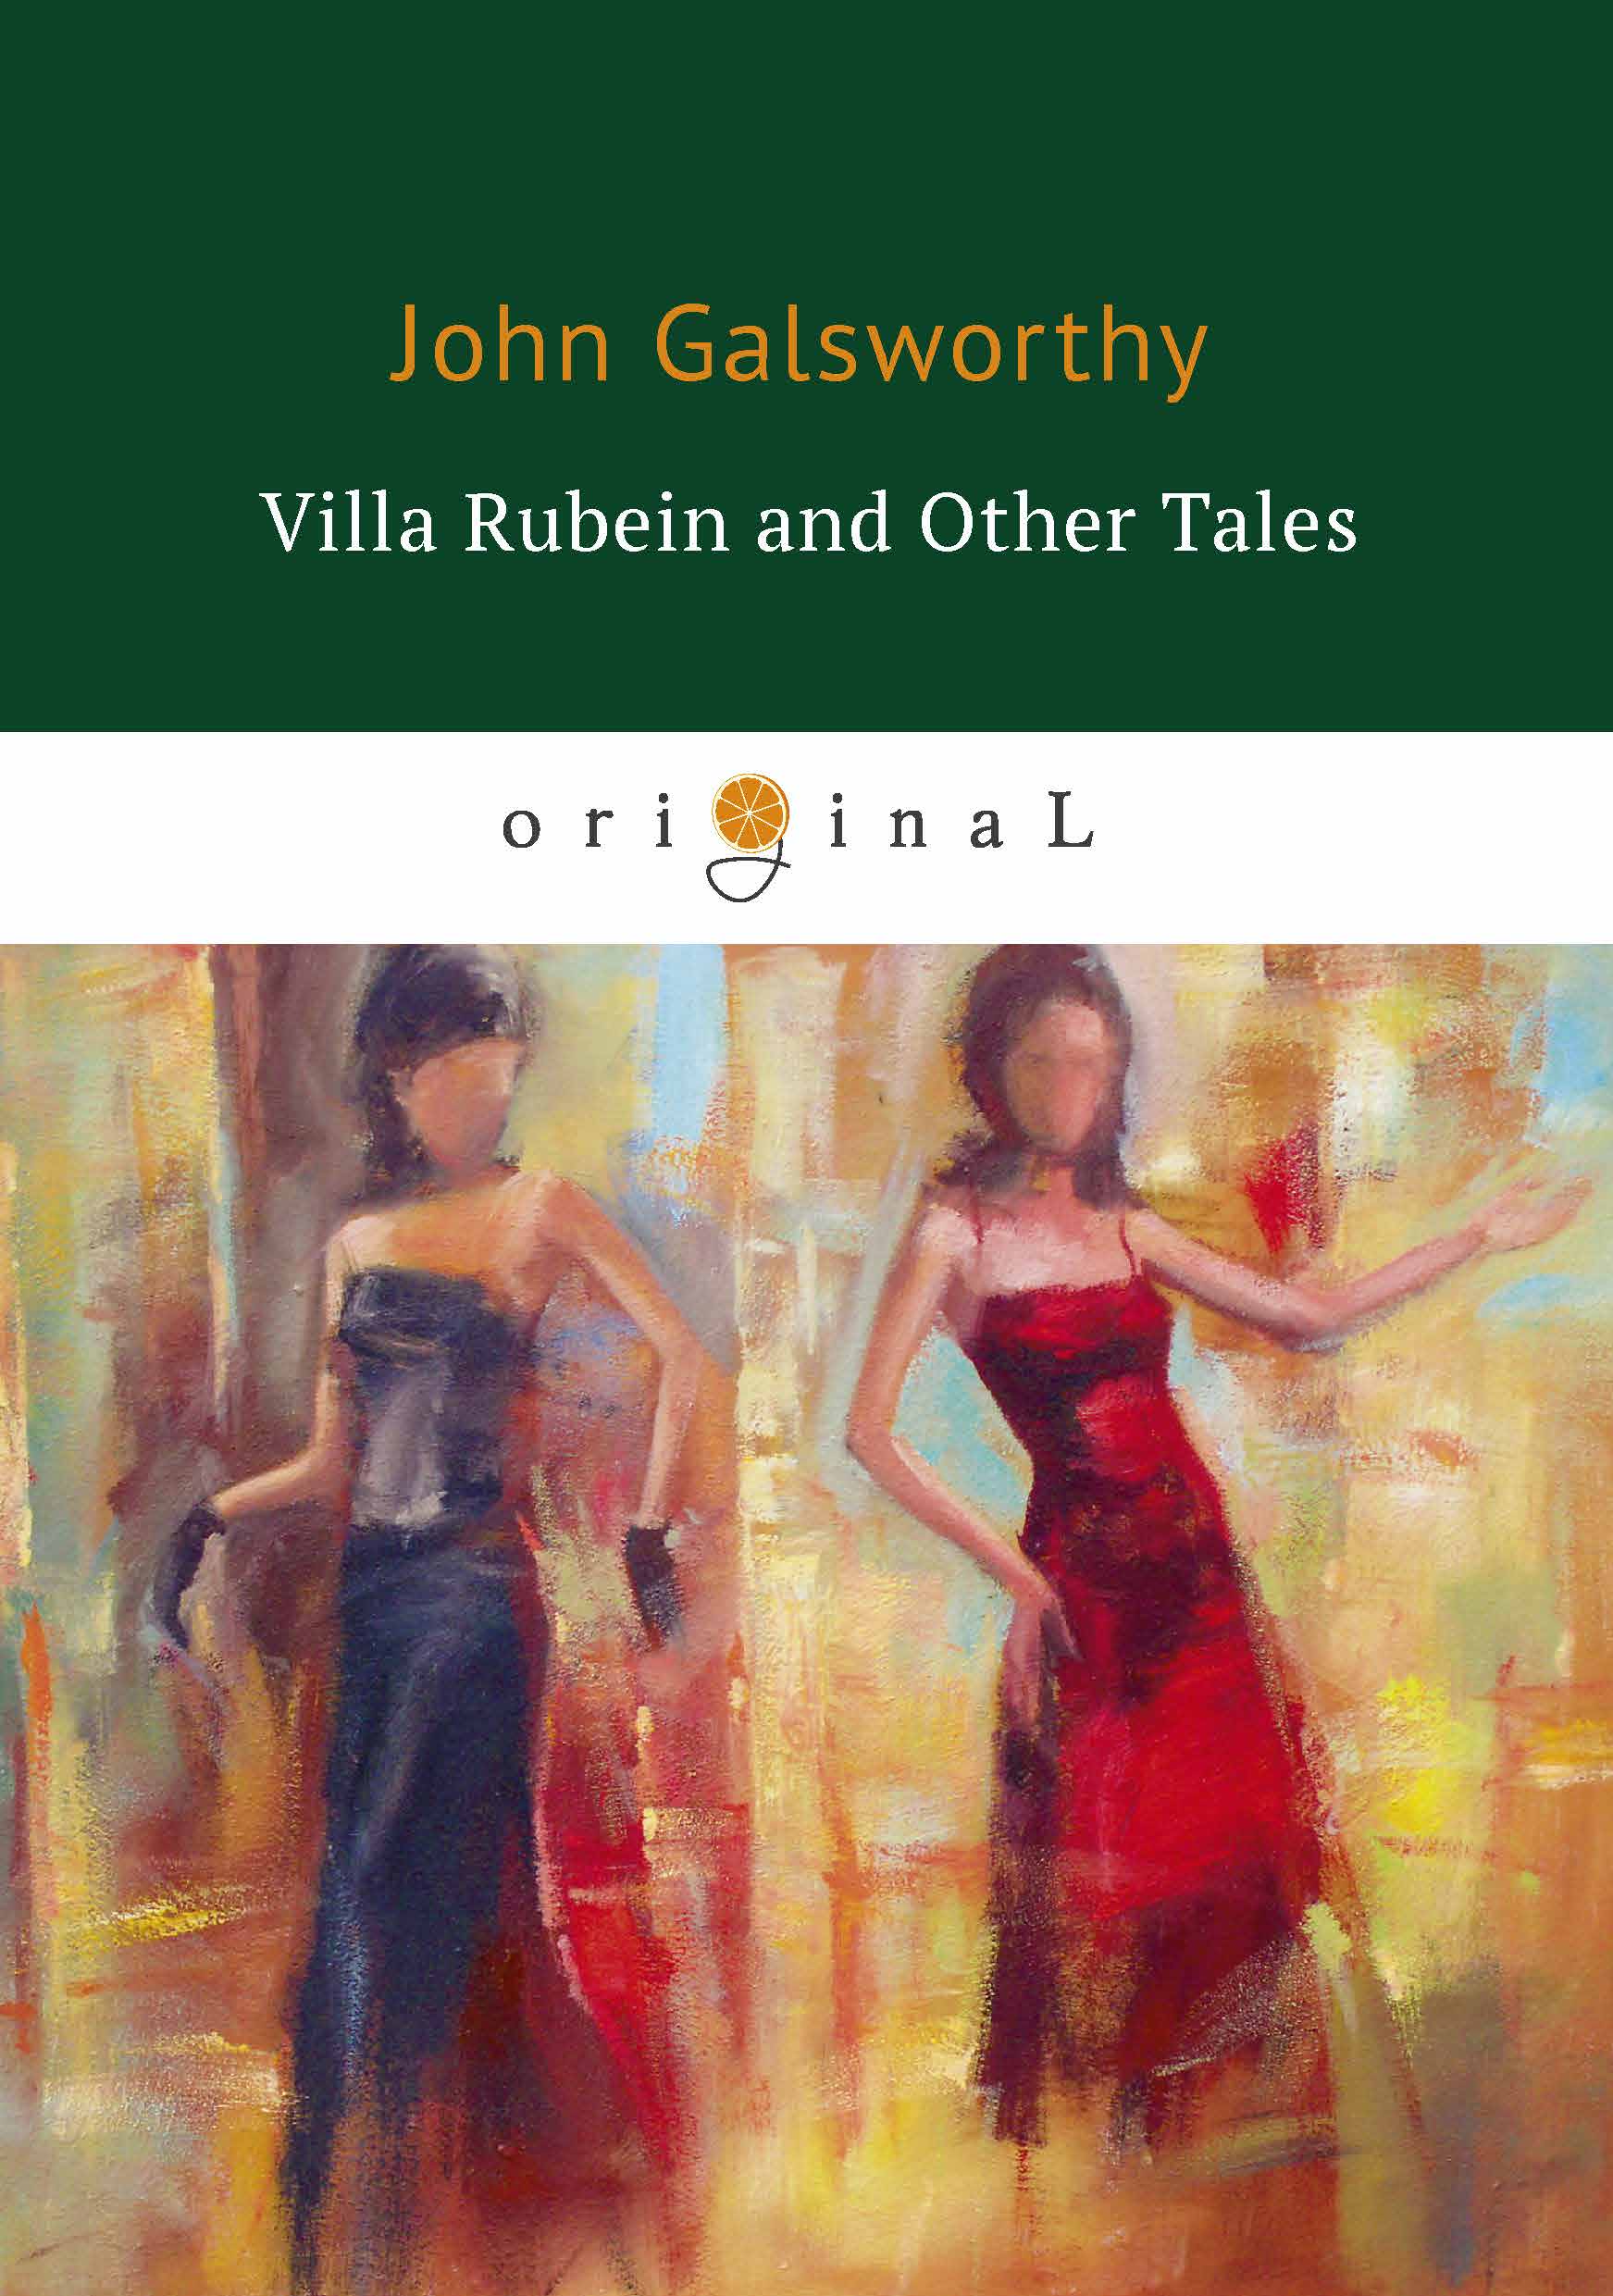 Villa Rubein and Other Tales. John Galsworthy